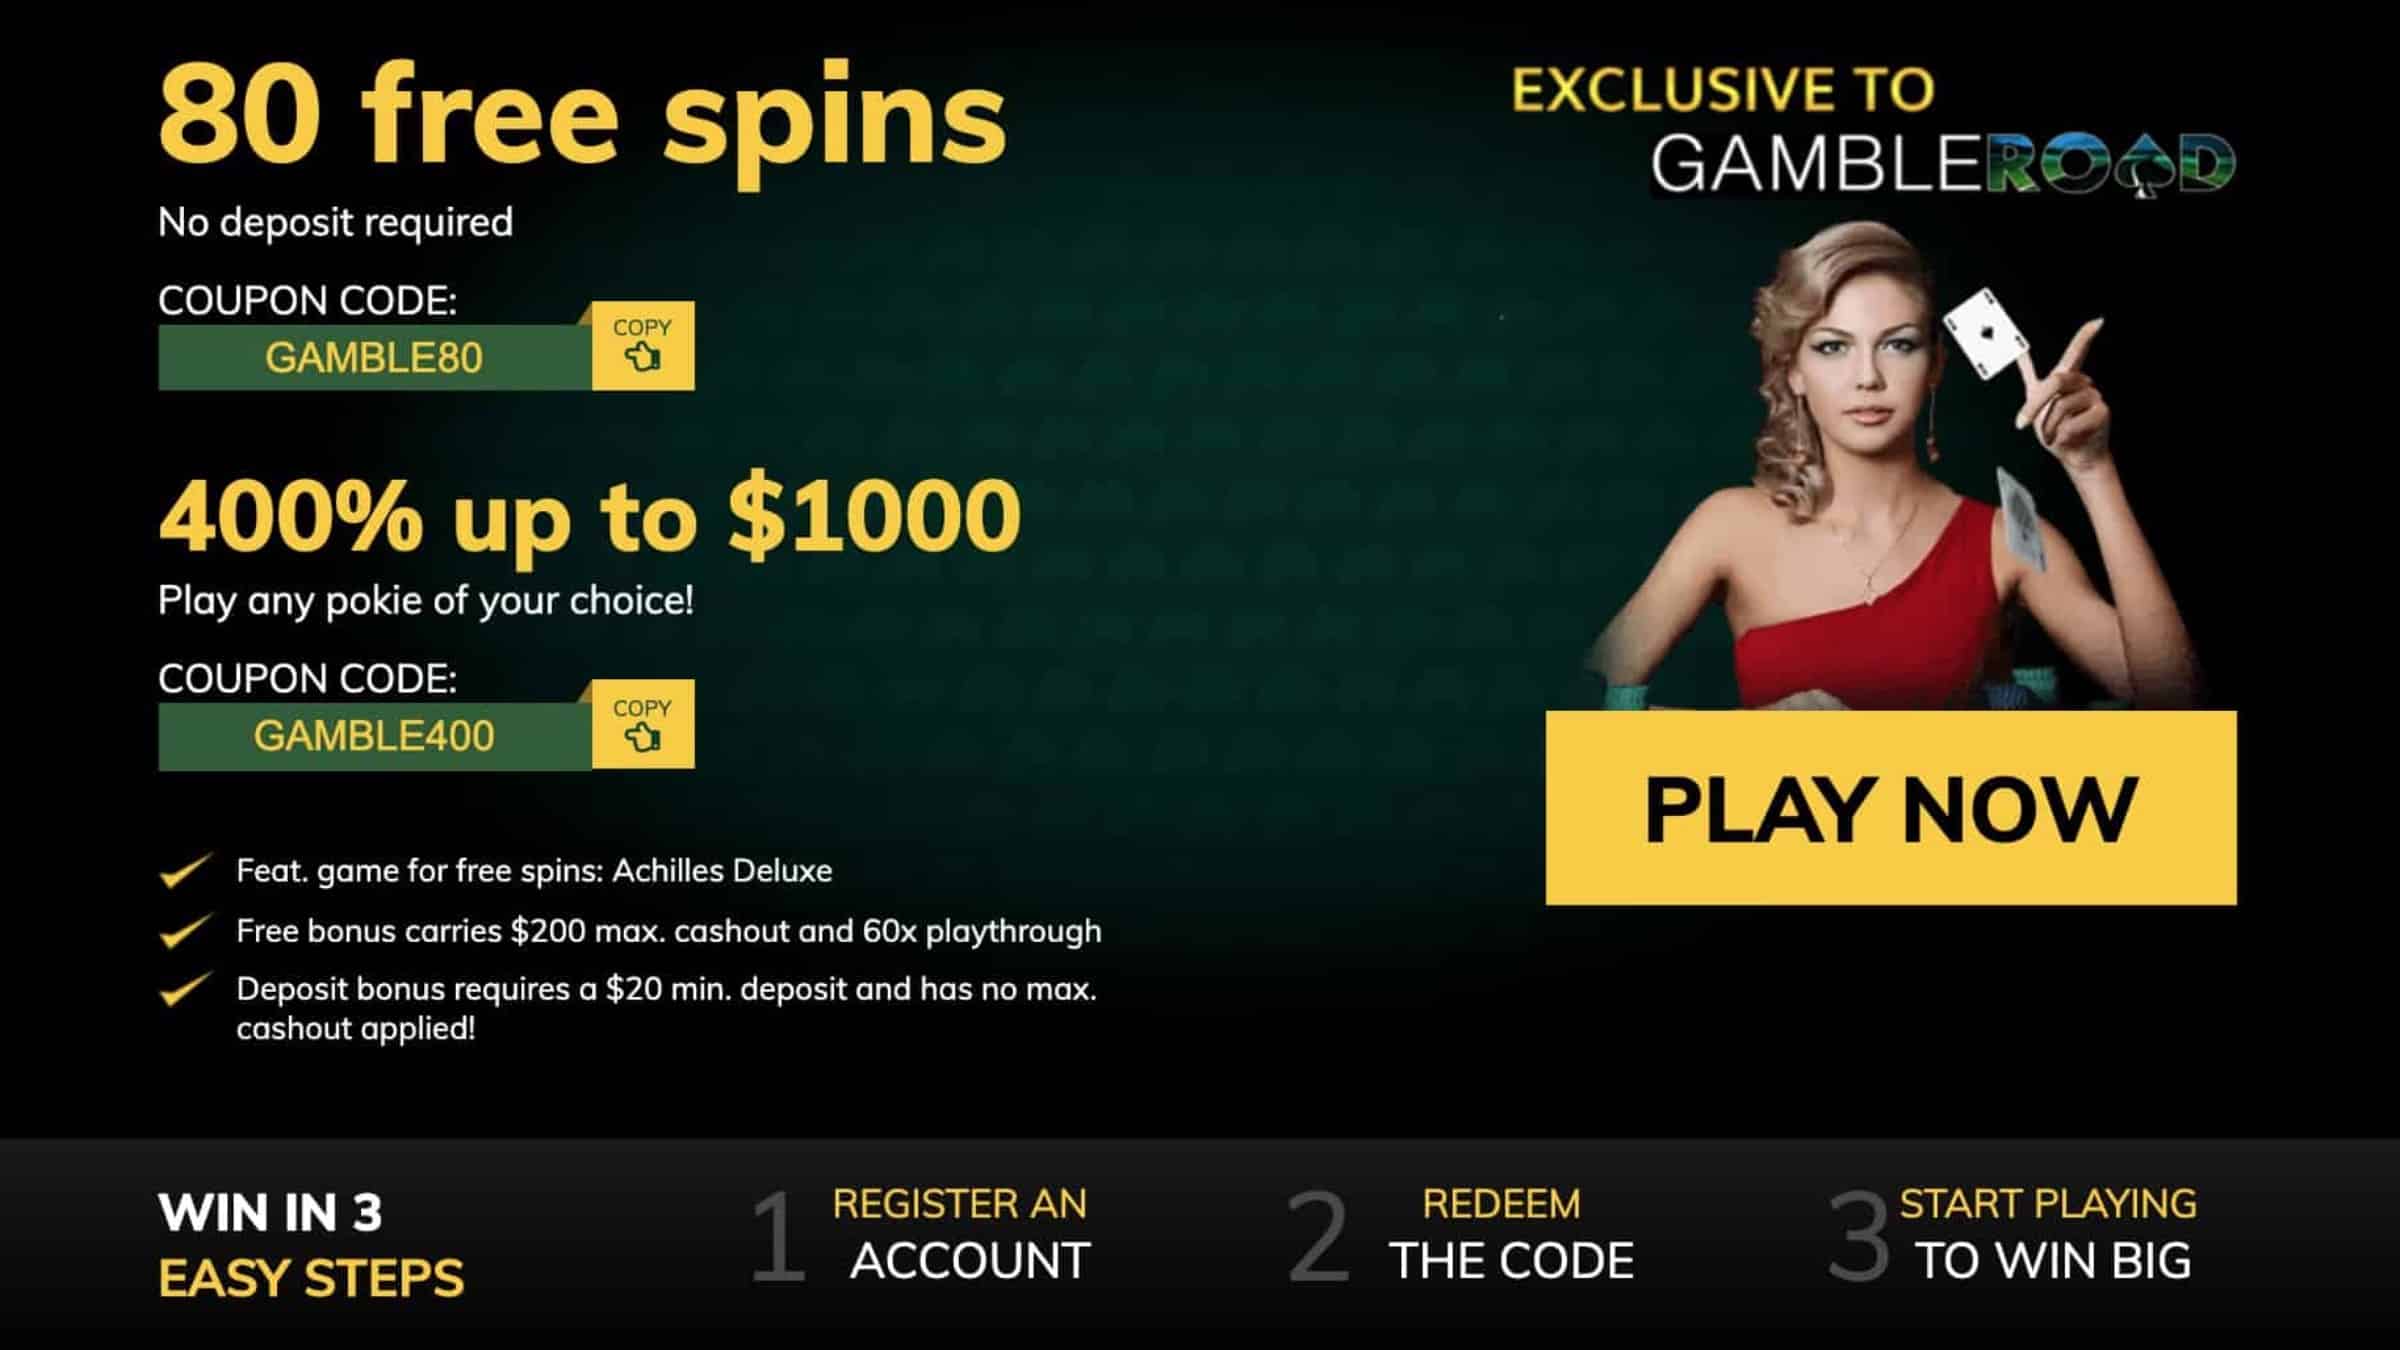 Play the latest pokies at Gday casino